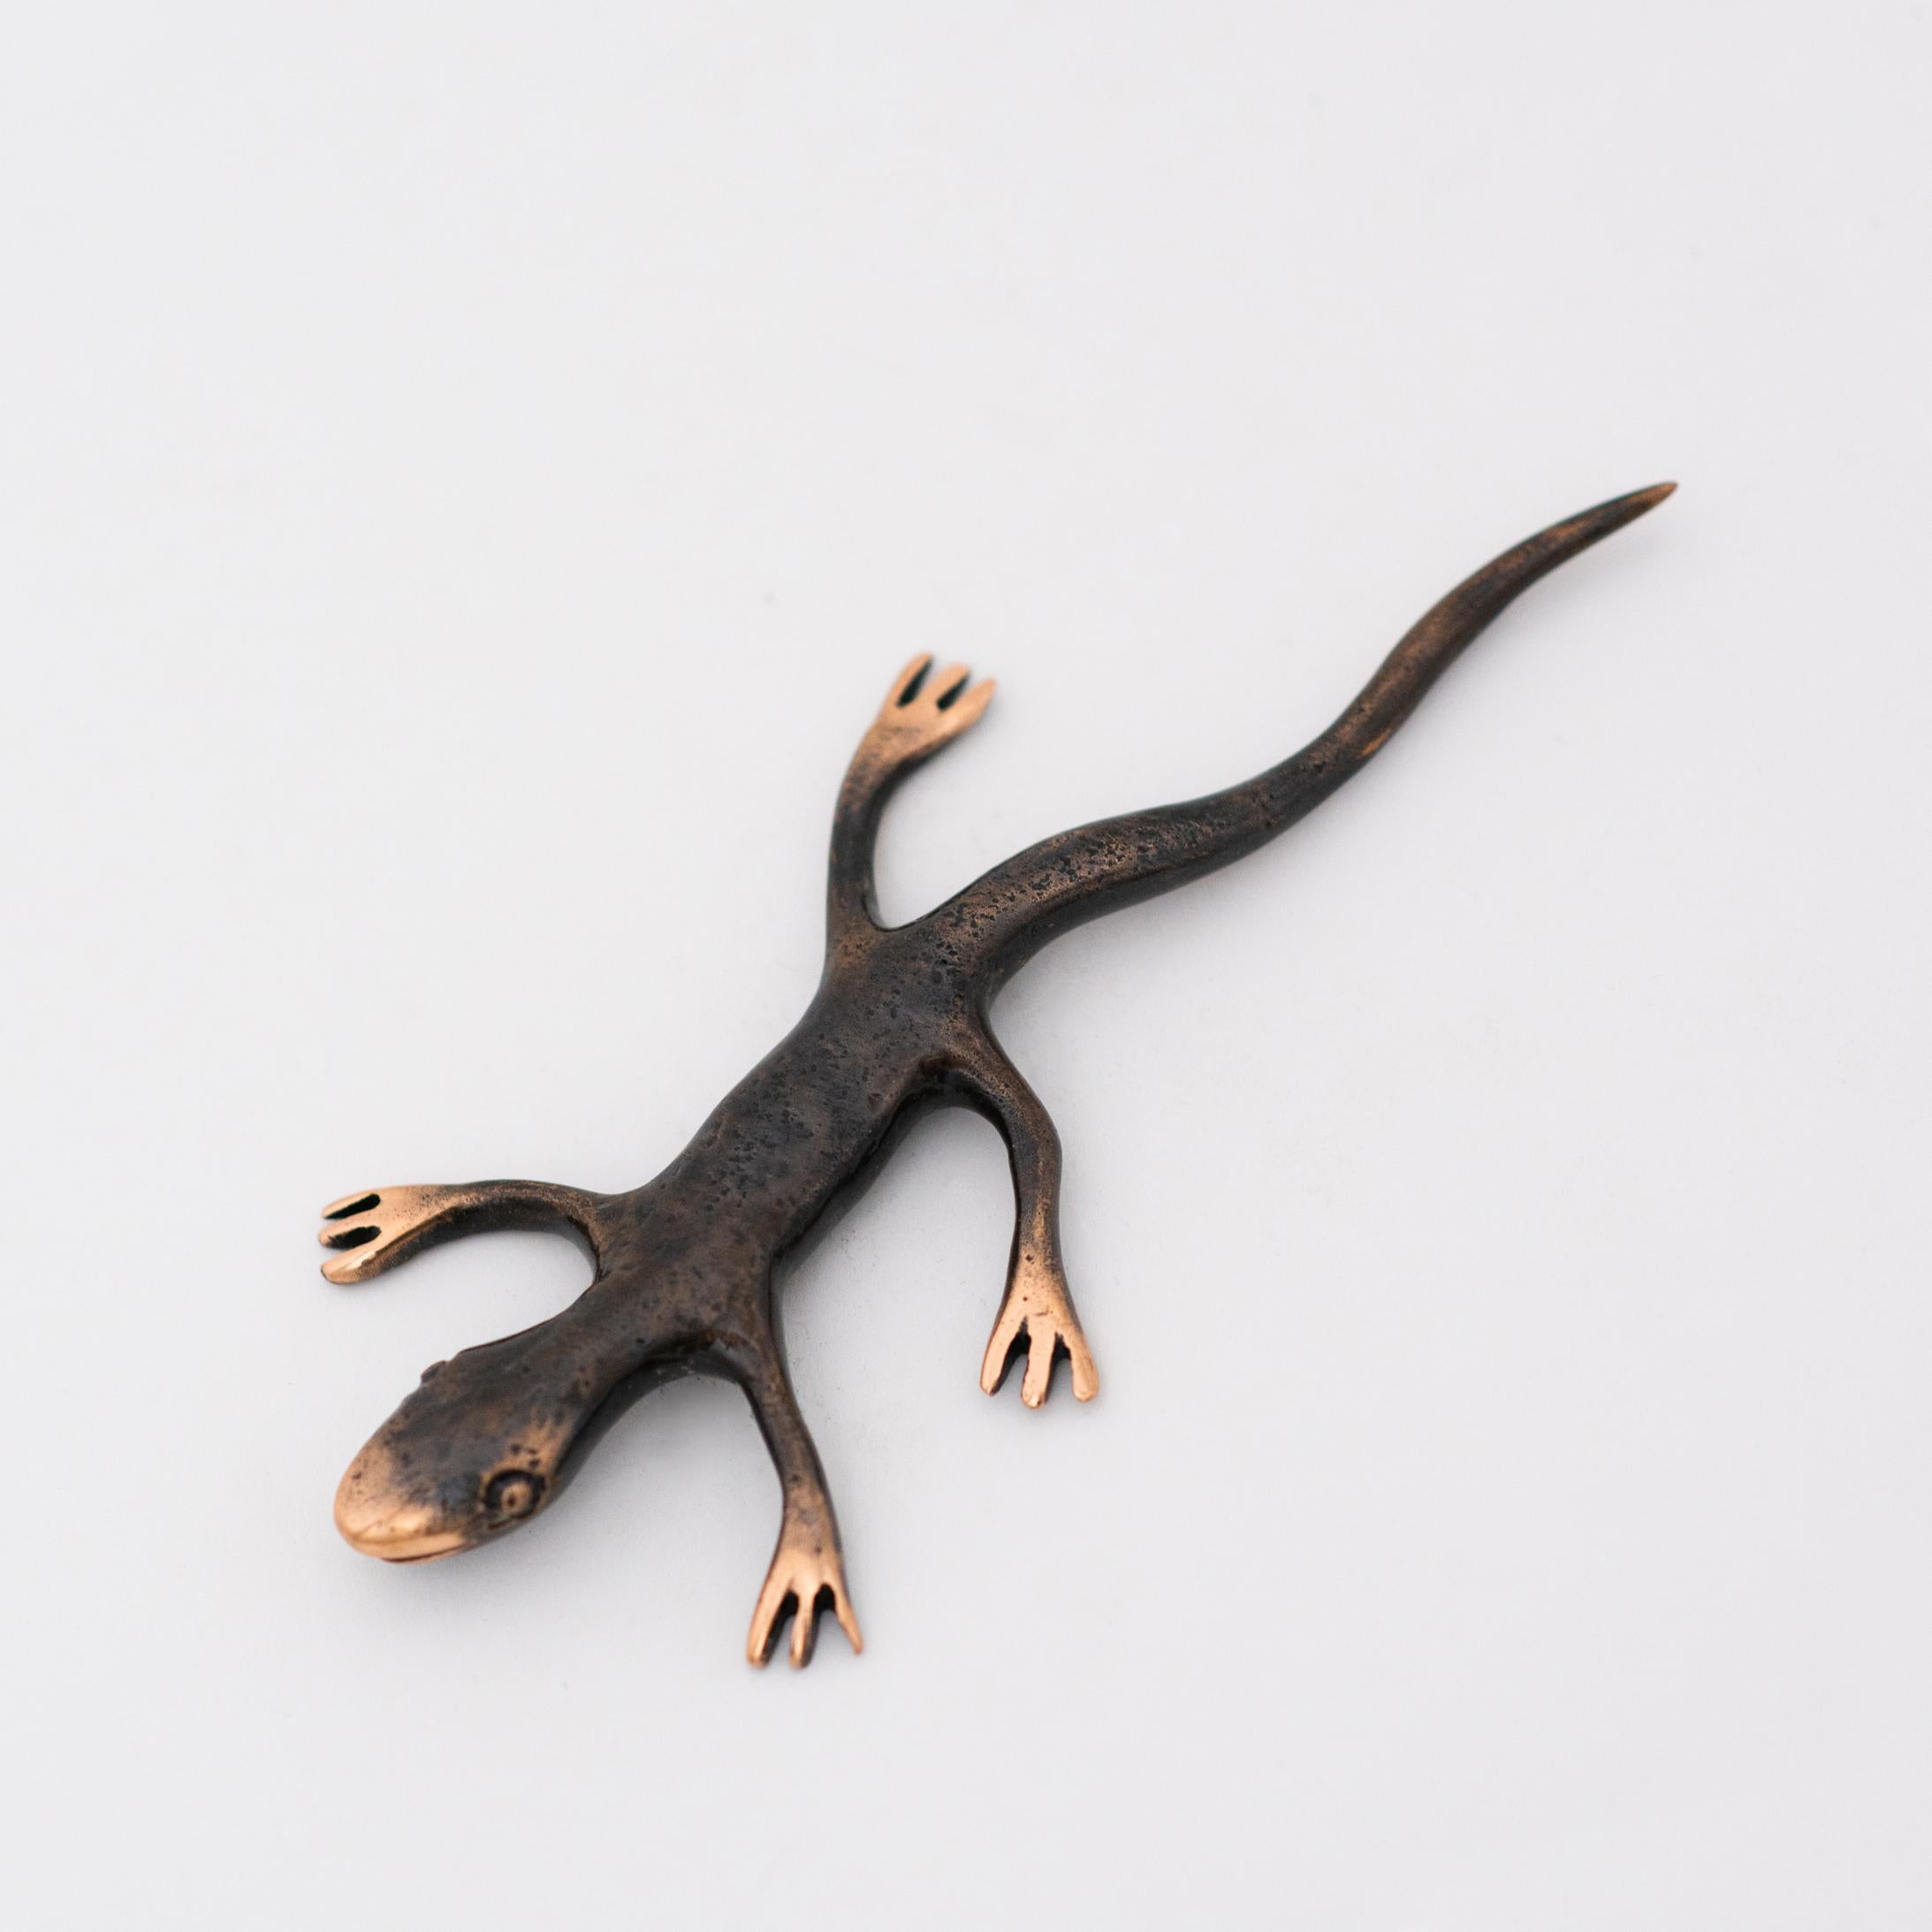 Beautiful hand cast bronze patinated gecko paperweight. The polished details in the gecko's feet highlight the characteristic rose gold colour of bronze.

Each of these geckos are handmade individually with incredible detail. Cast using very